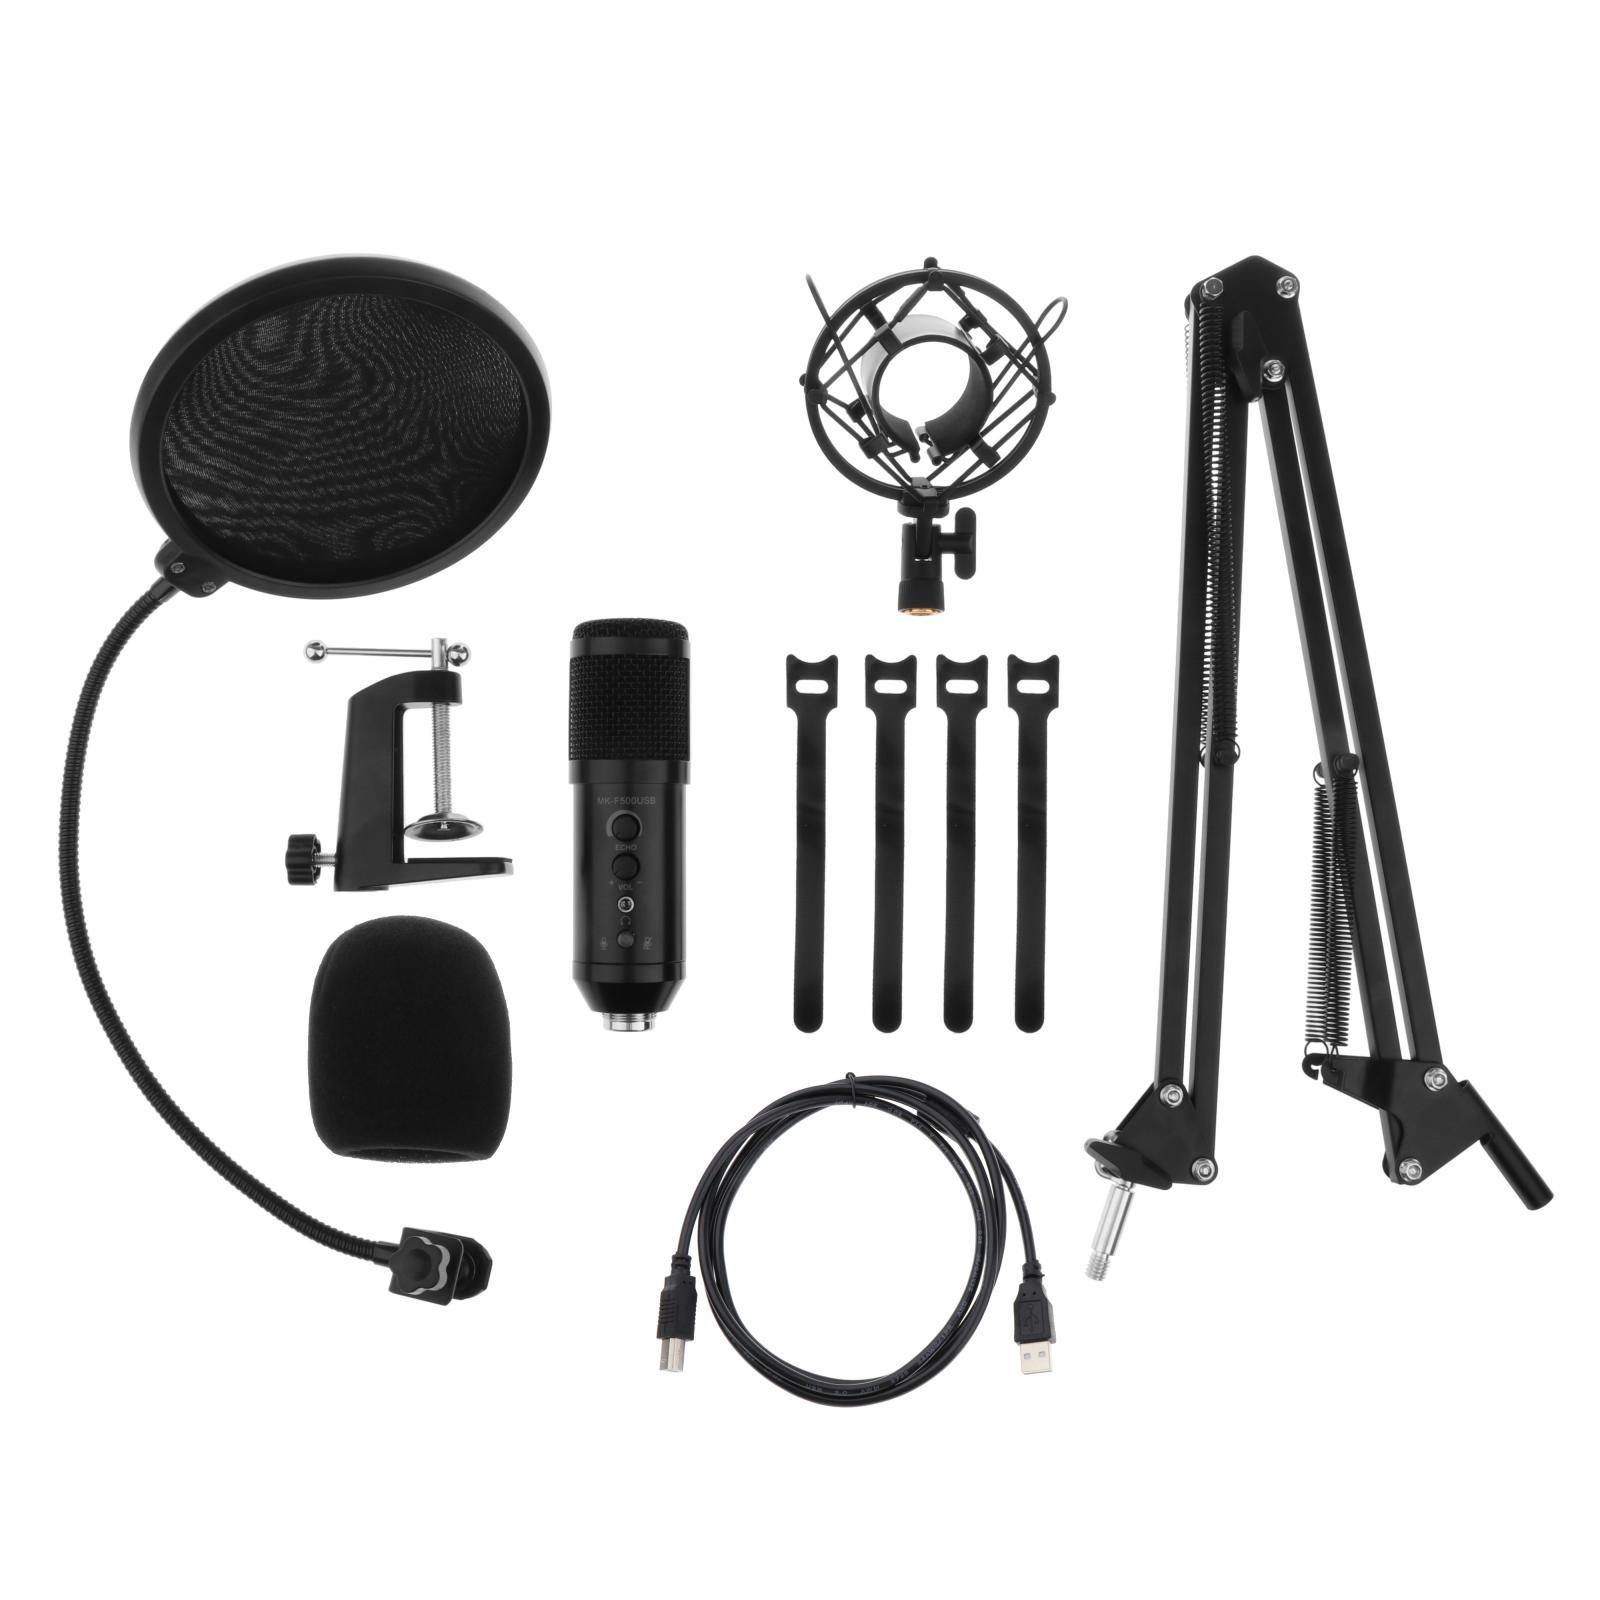 USB Podcast Condenser Microphone, Professional PC Streaming Cardioid Microphone Kit with Boom Arm, Shock Mount,  Filter and Windscreen